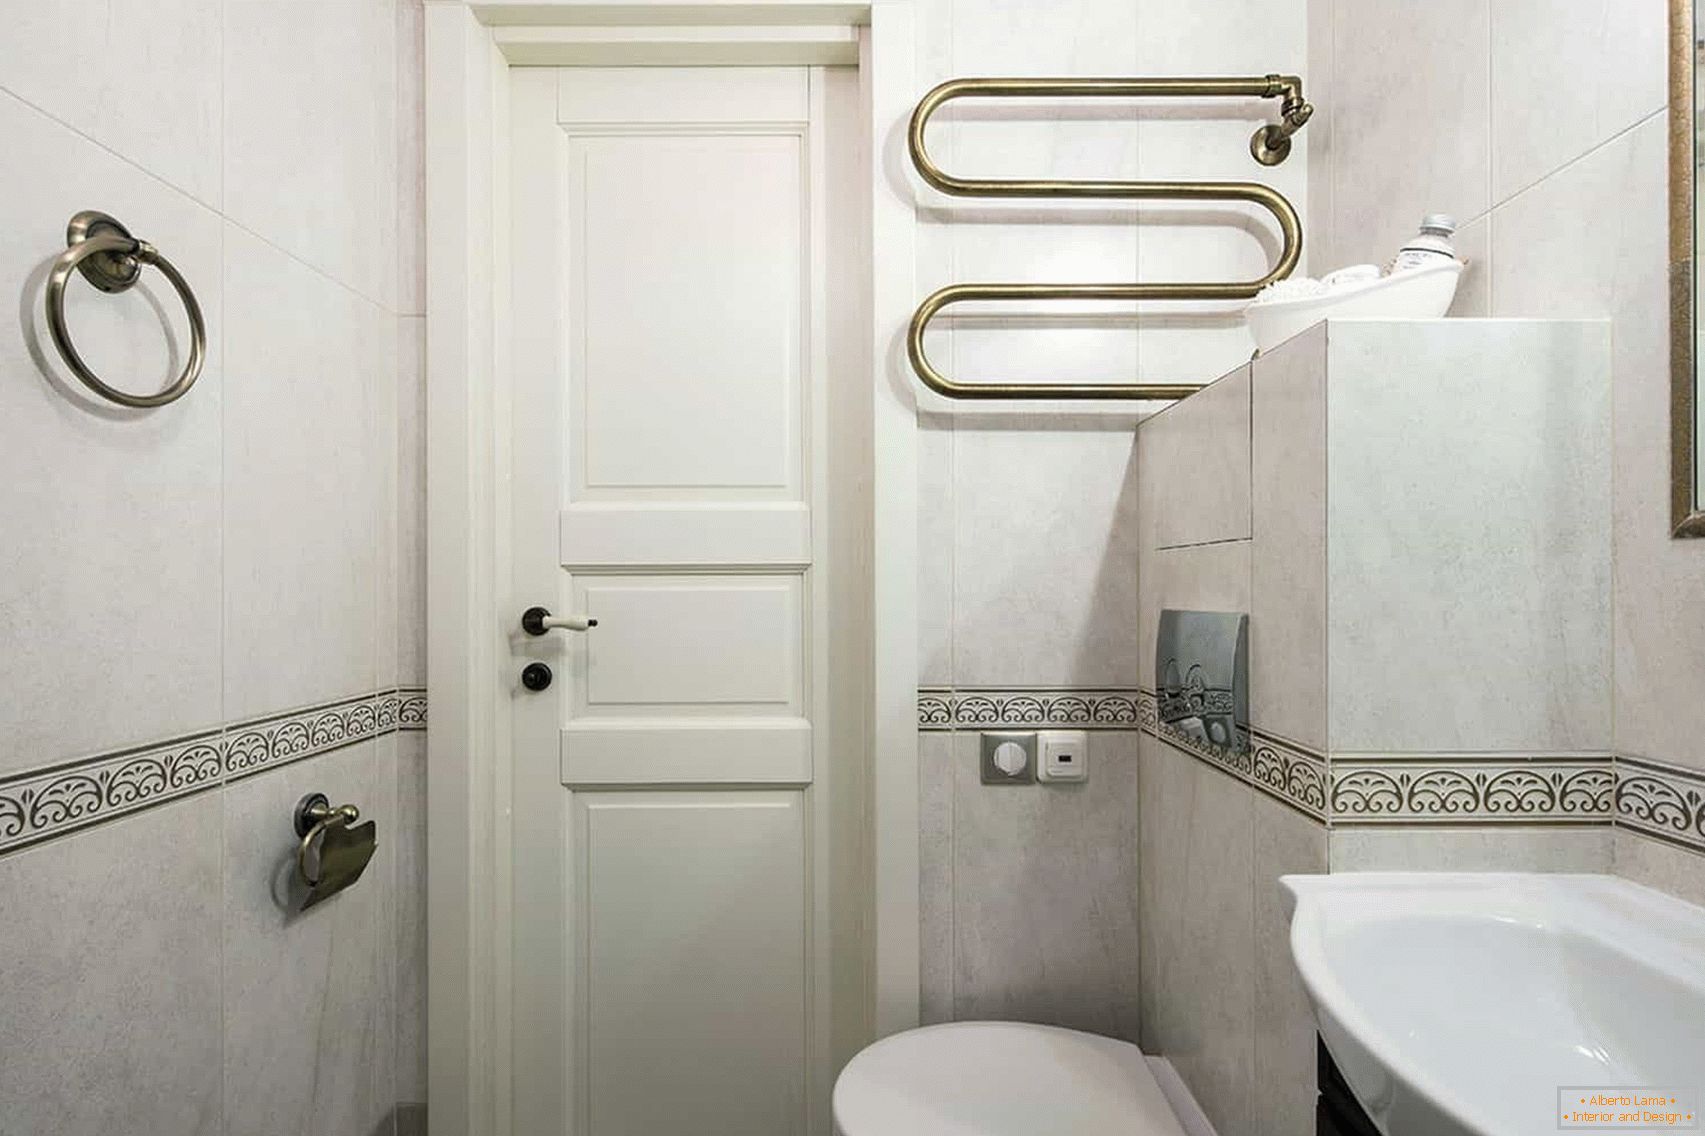 Bathroom design in the panel house